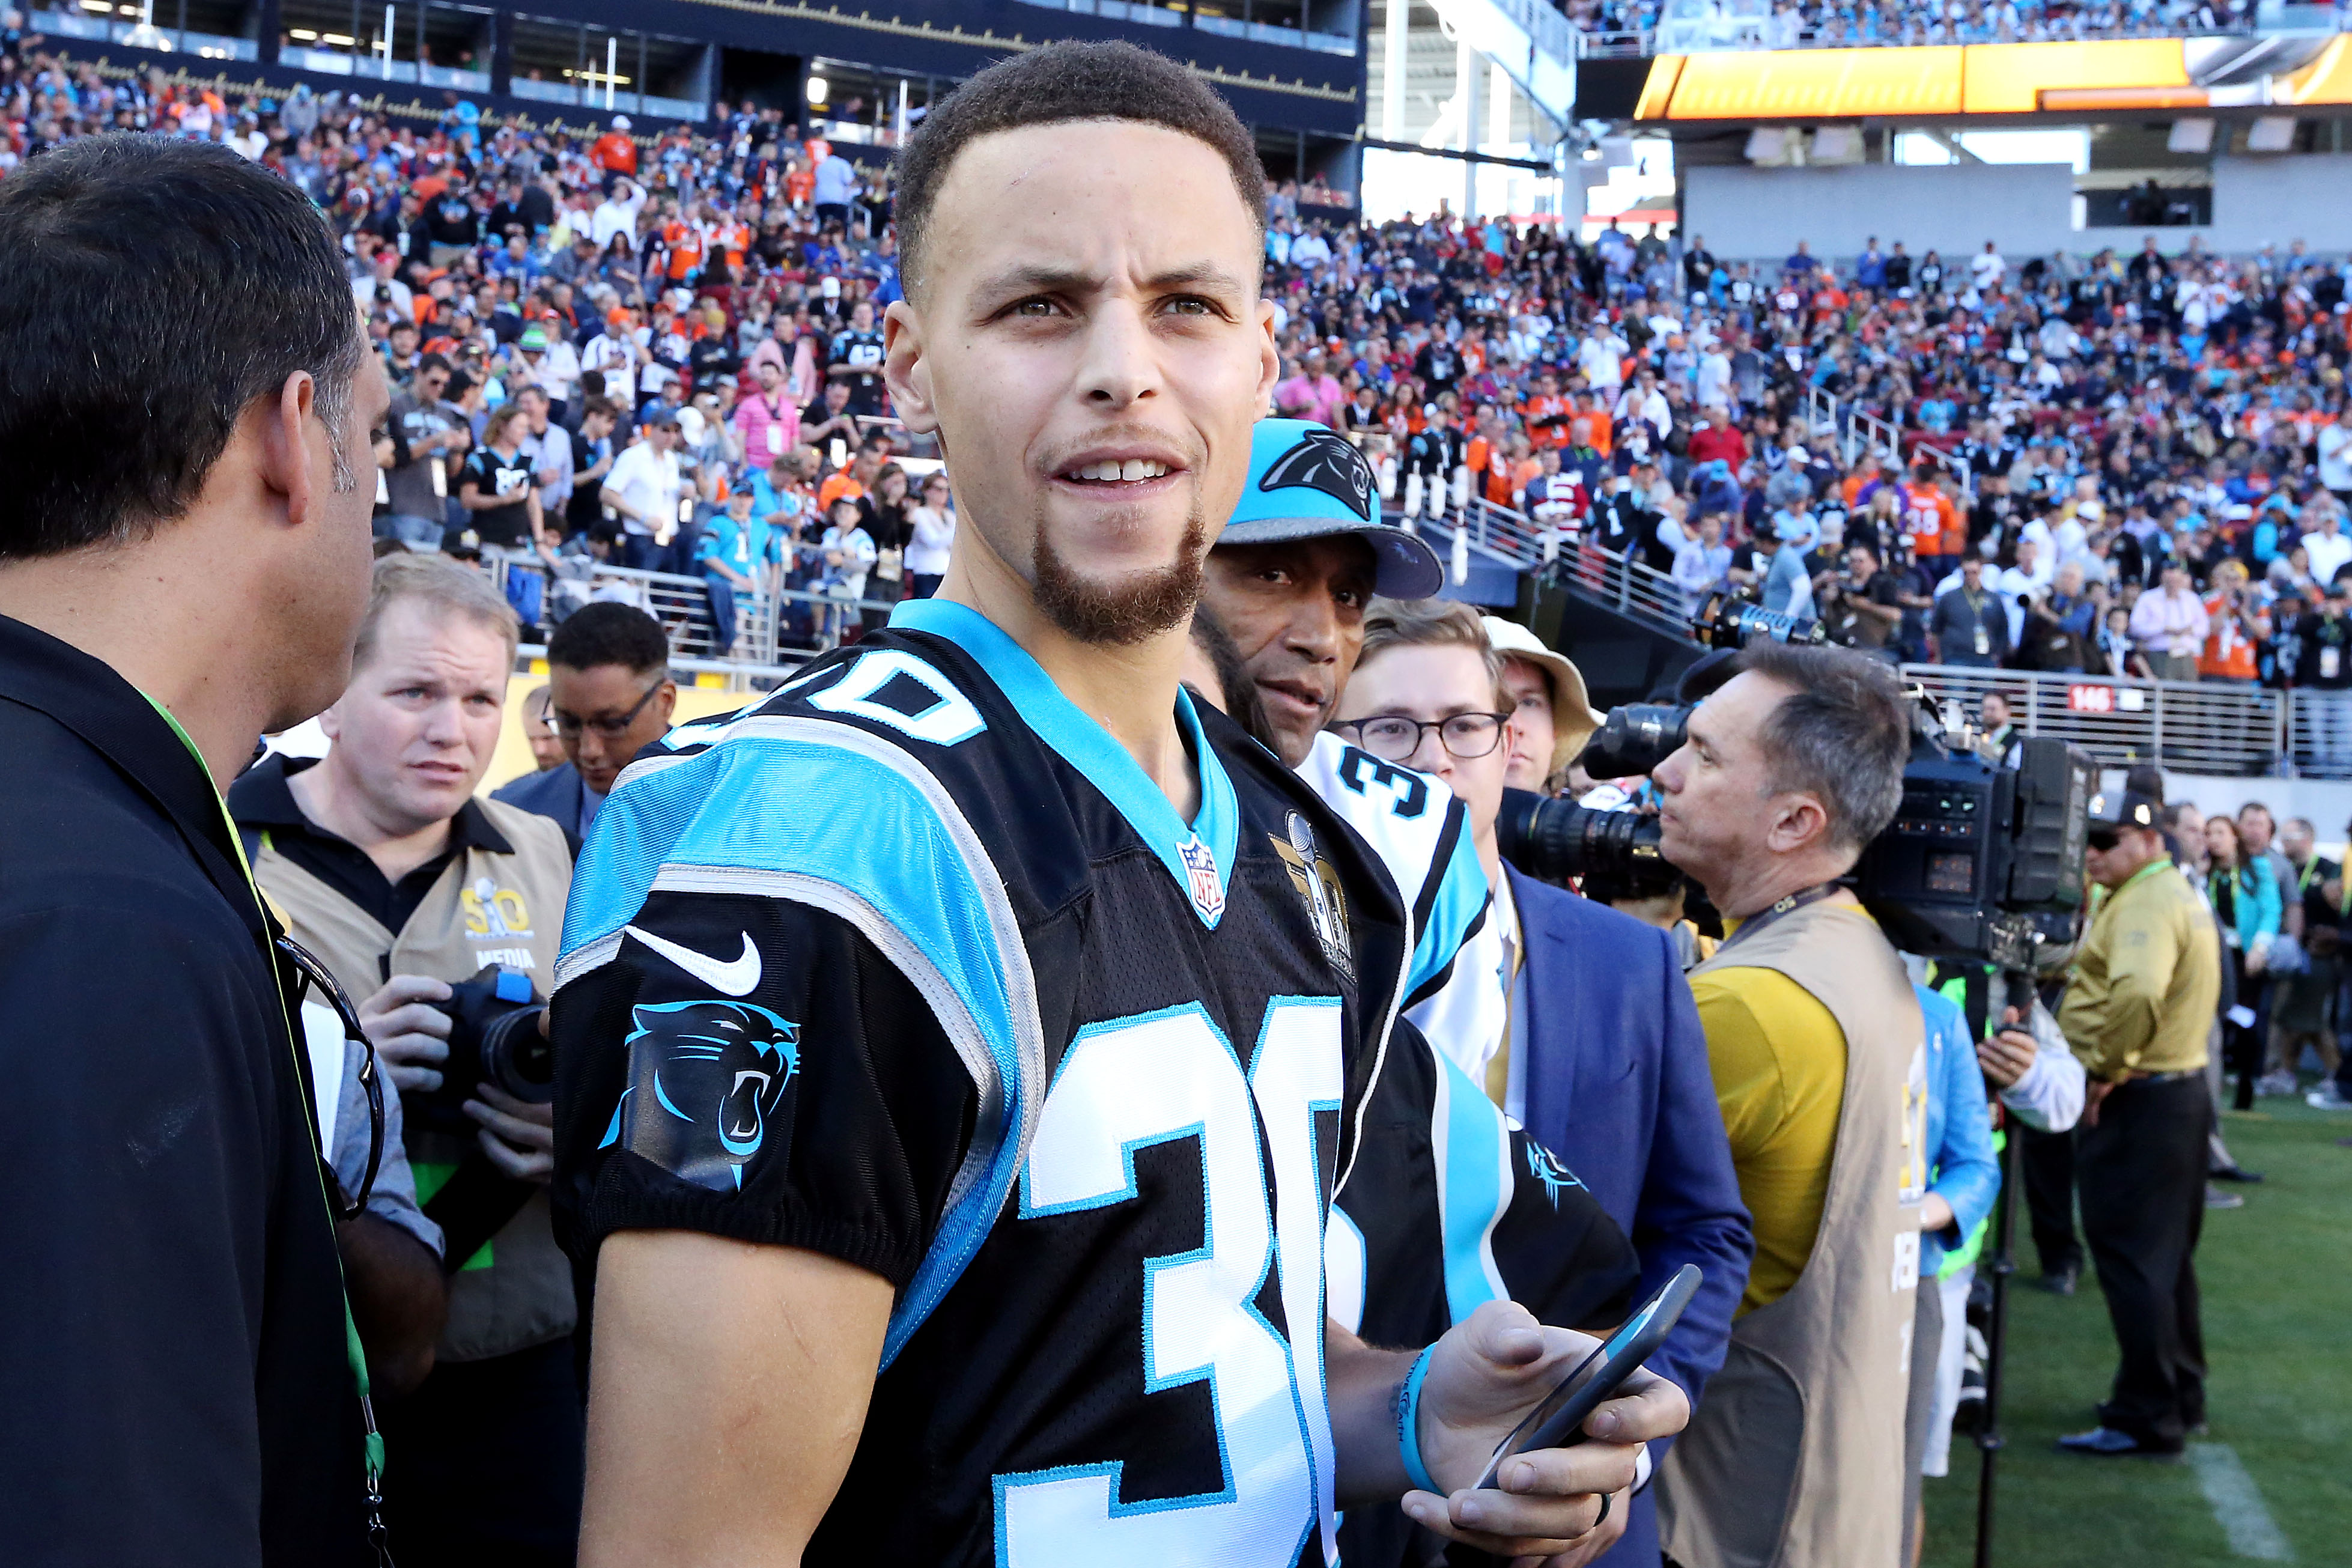 'I want in!' | Stephen Curry shows support for Diddy's campaign to buy the Panthers